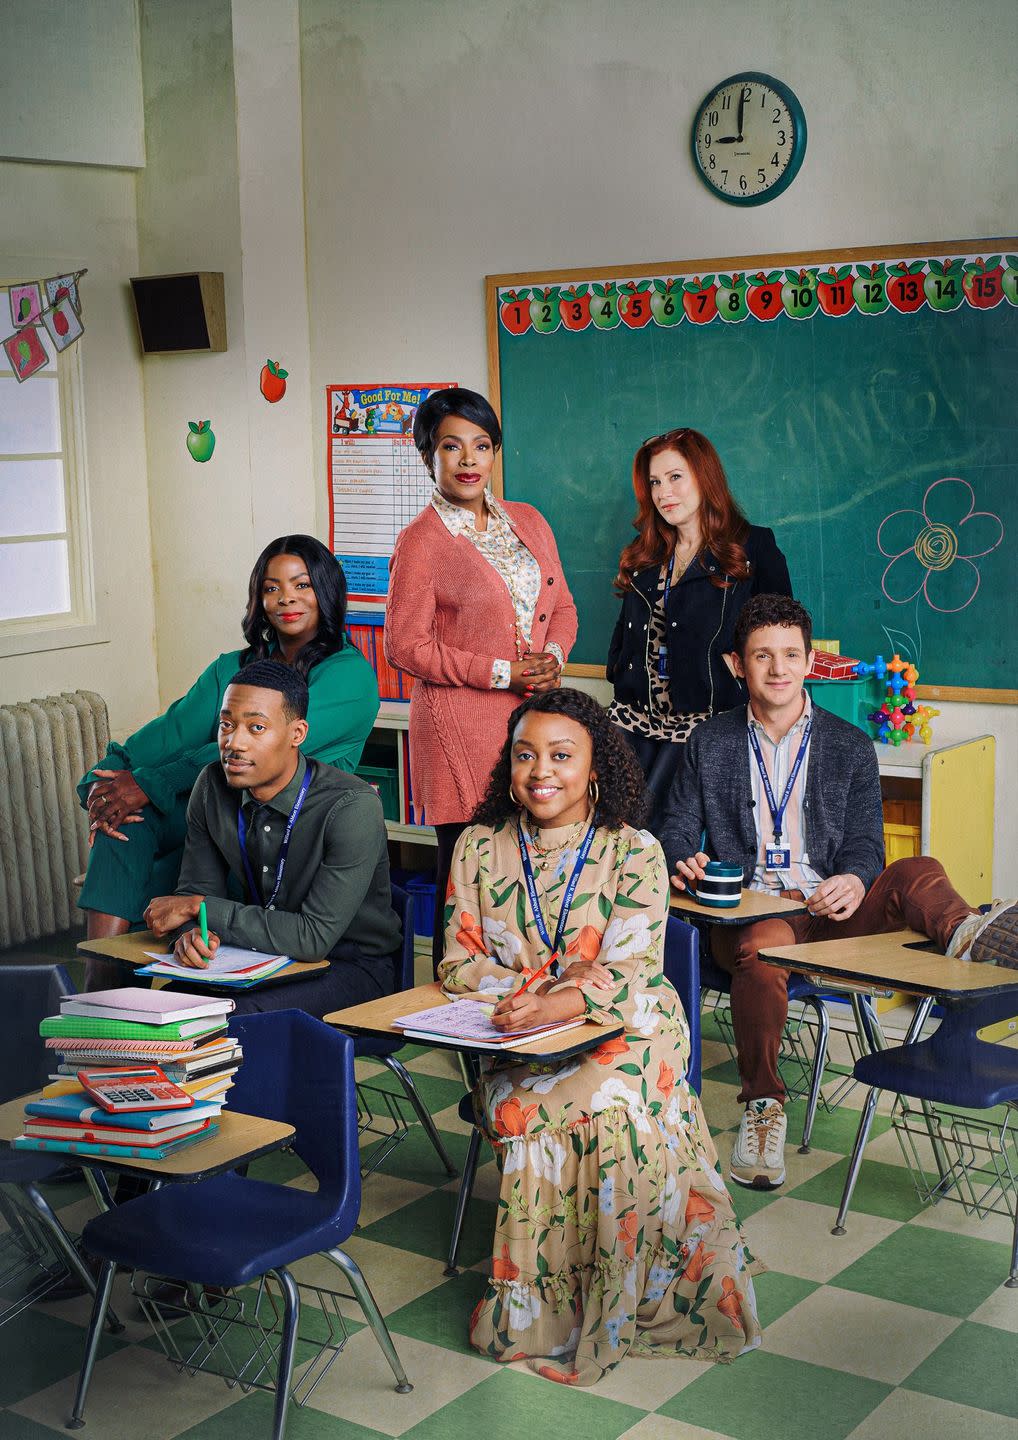 tyler james williams as gregory, janelle james as ava, quinta brunson as janine, sheryl lee ralph as barbara, chris perfetti as jacob, and lisa ann walter as melissa in abbott elementary